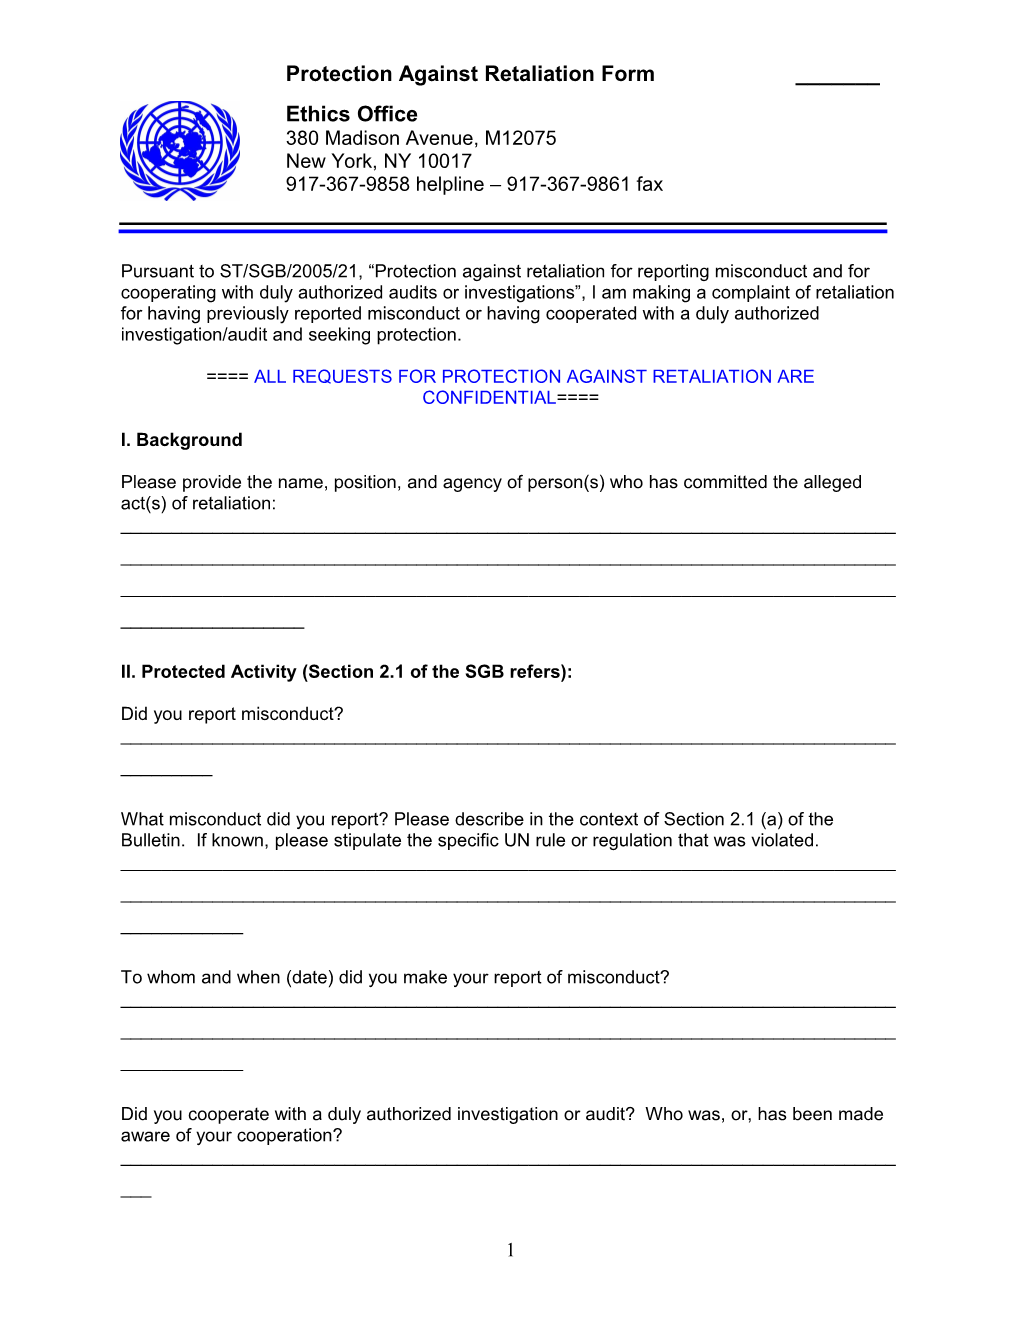 Ethics Office Form for ST/SGB/2005/21 Complaints